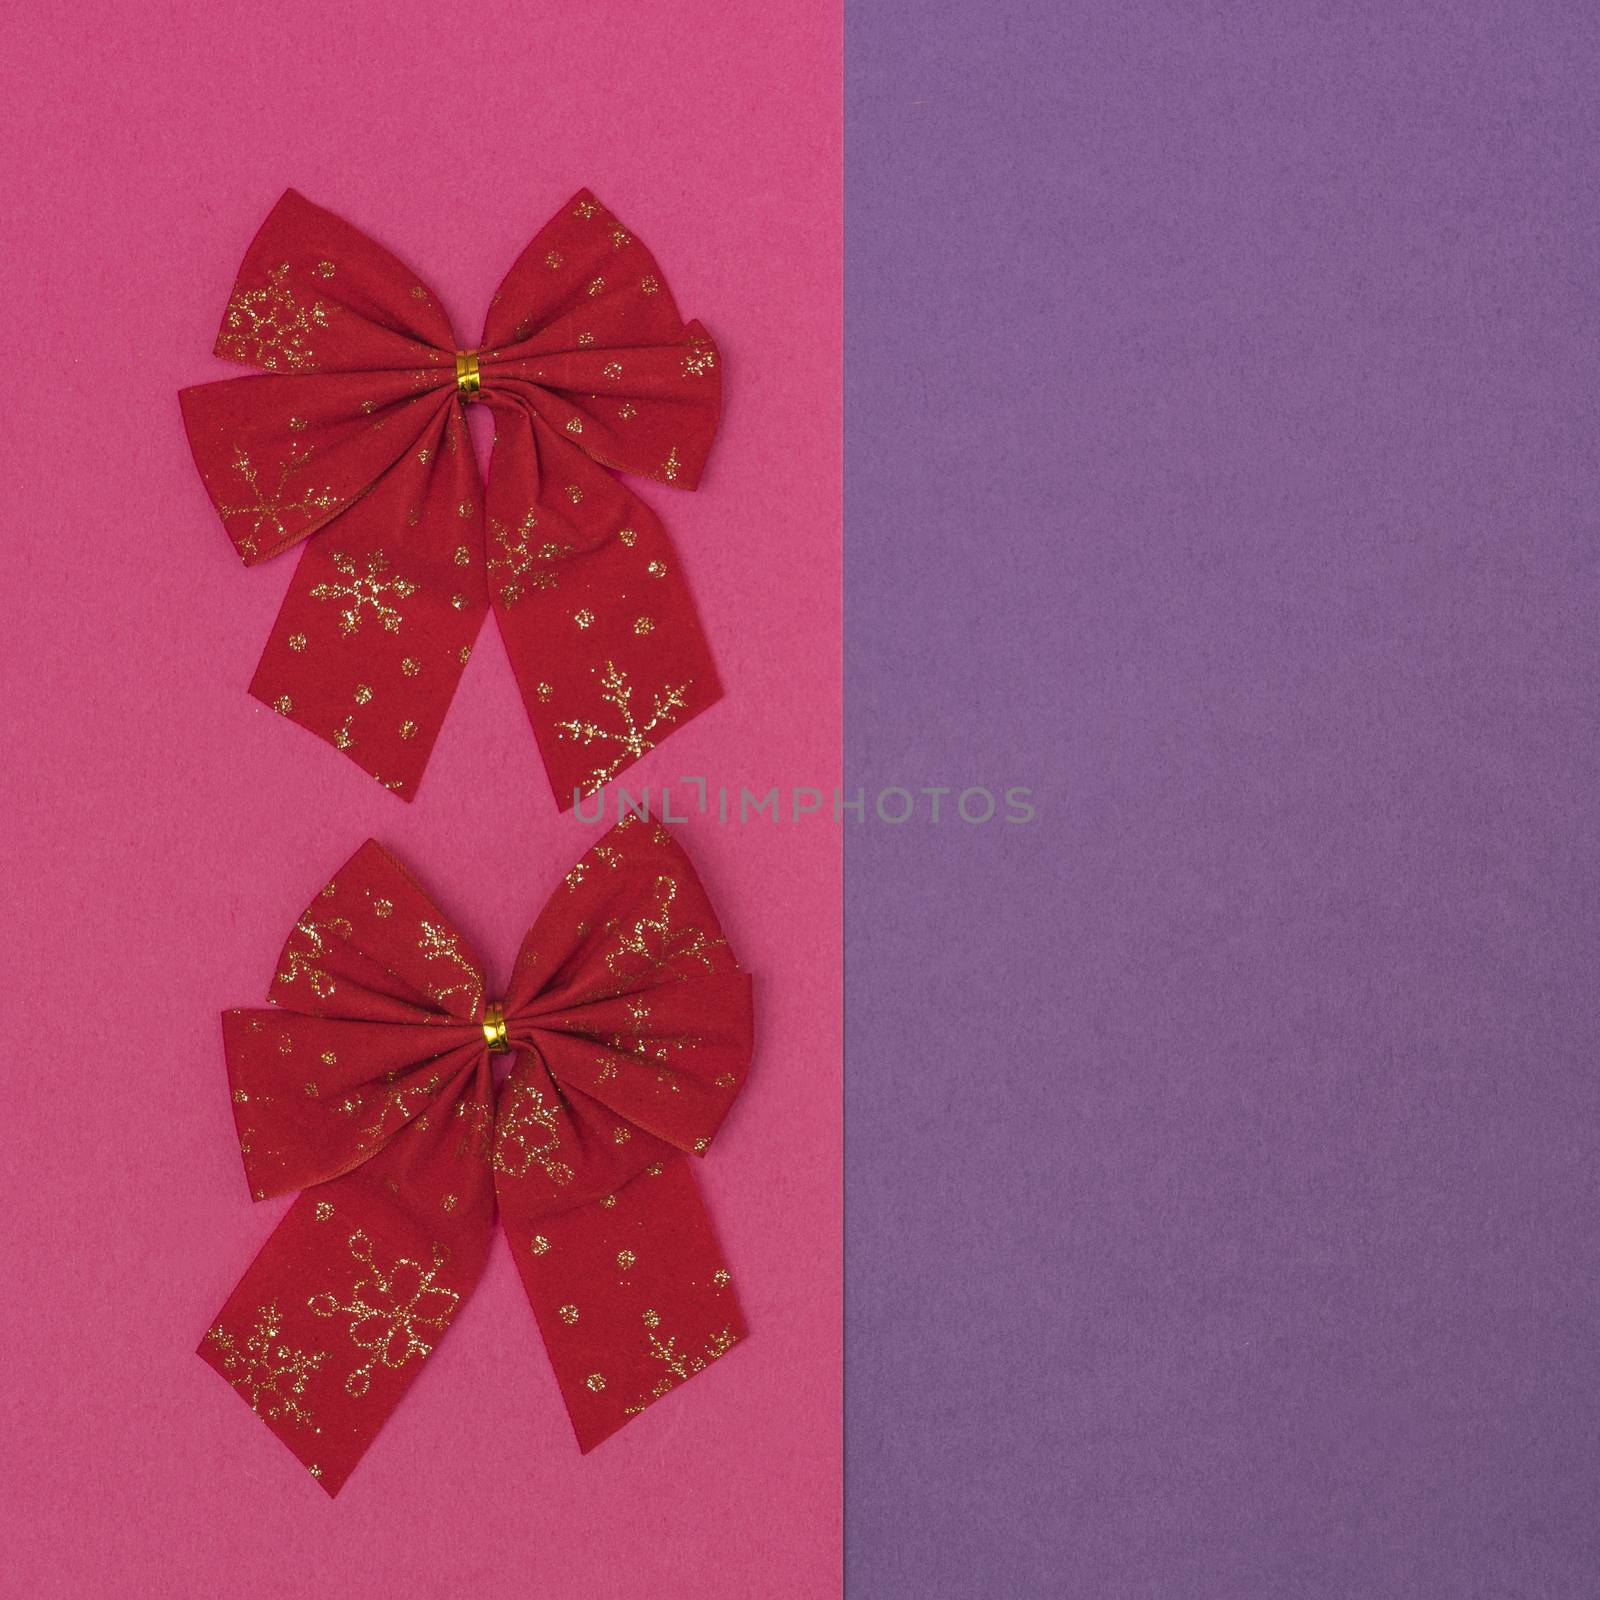 Christmas decorative red bows in a white frame on a colored background